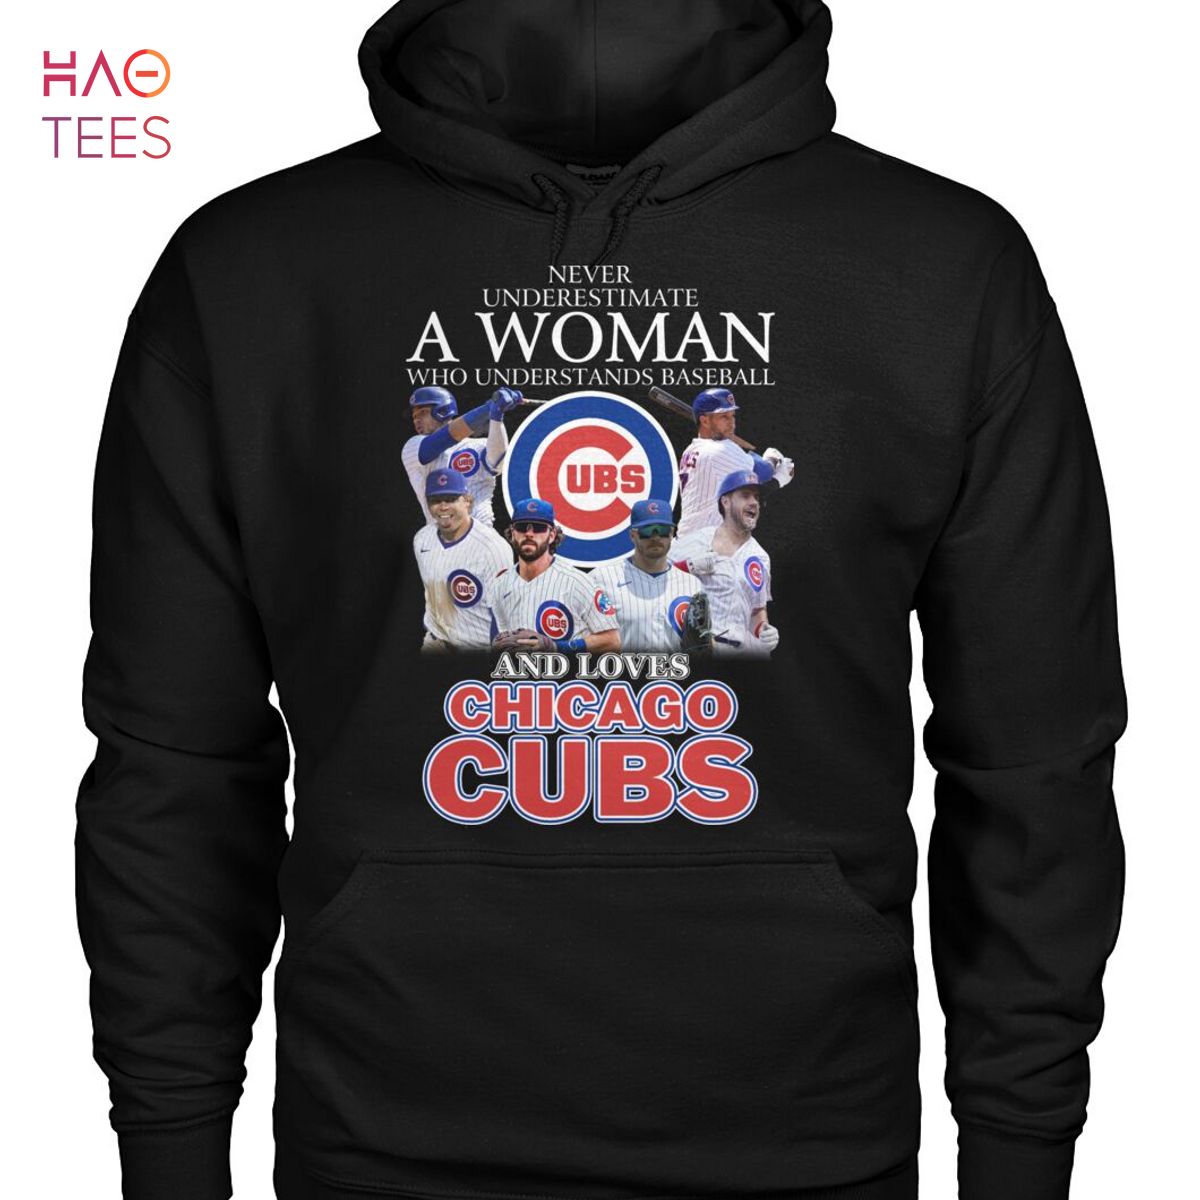 Never Underestimate A Woman Who Understands Baseball and Loves Chicago Cubs  Shirt